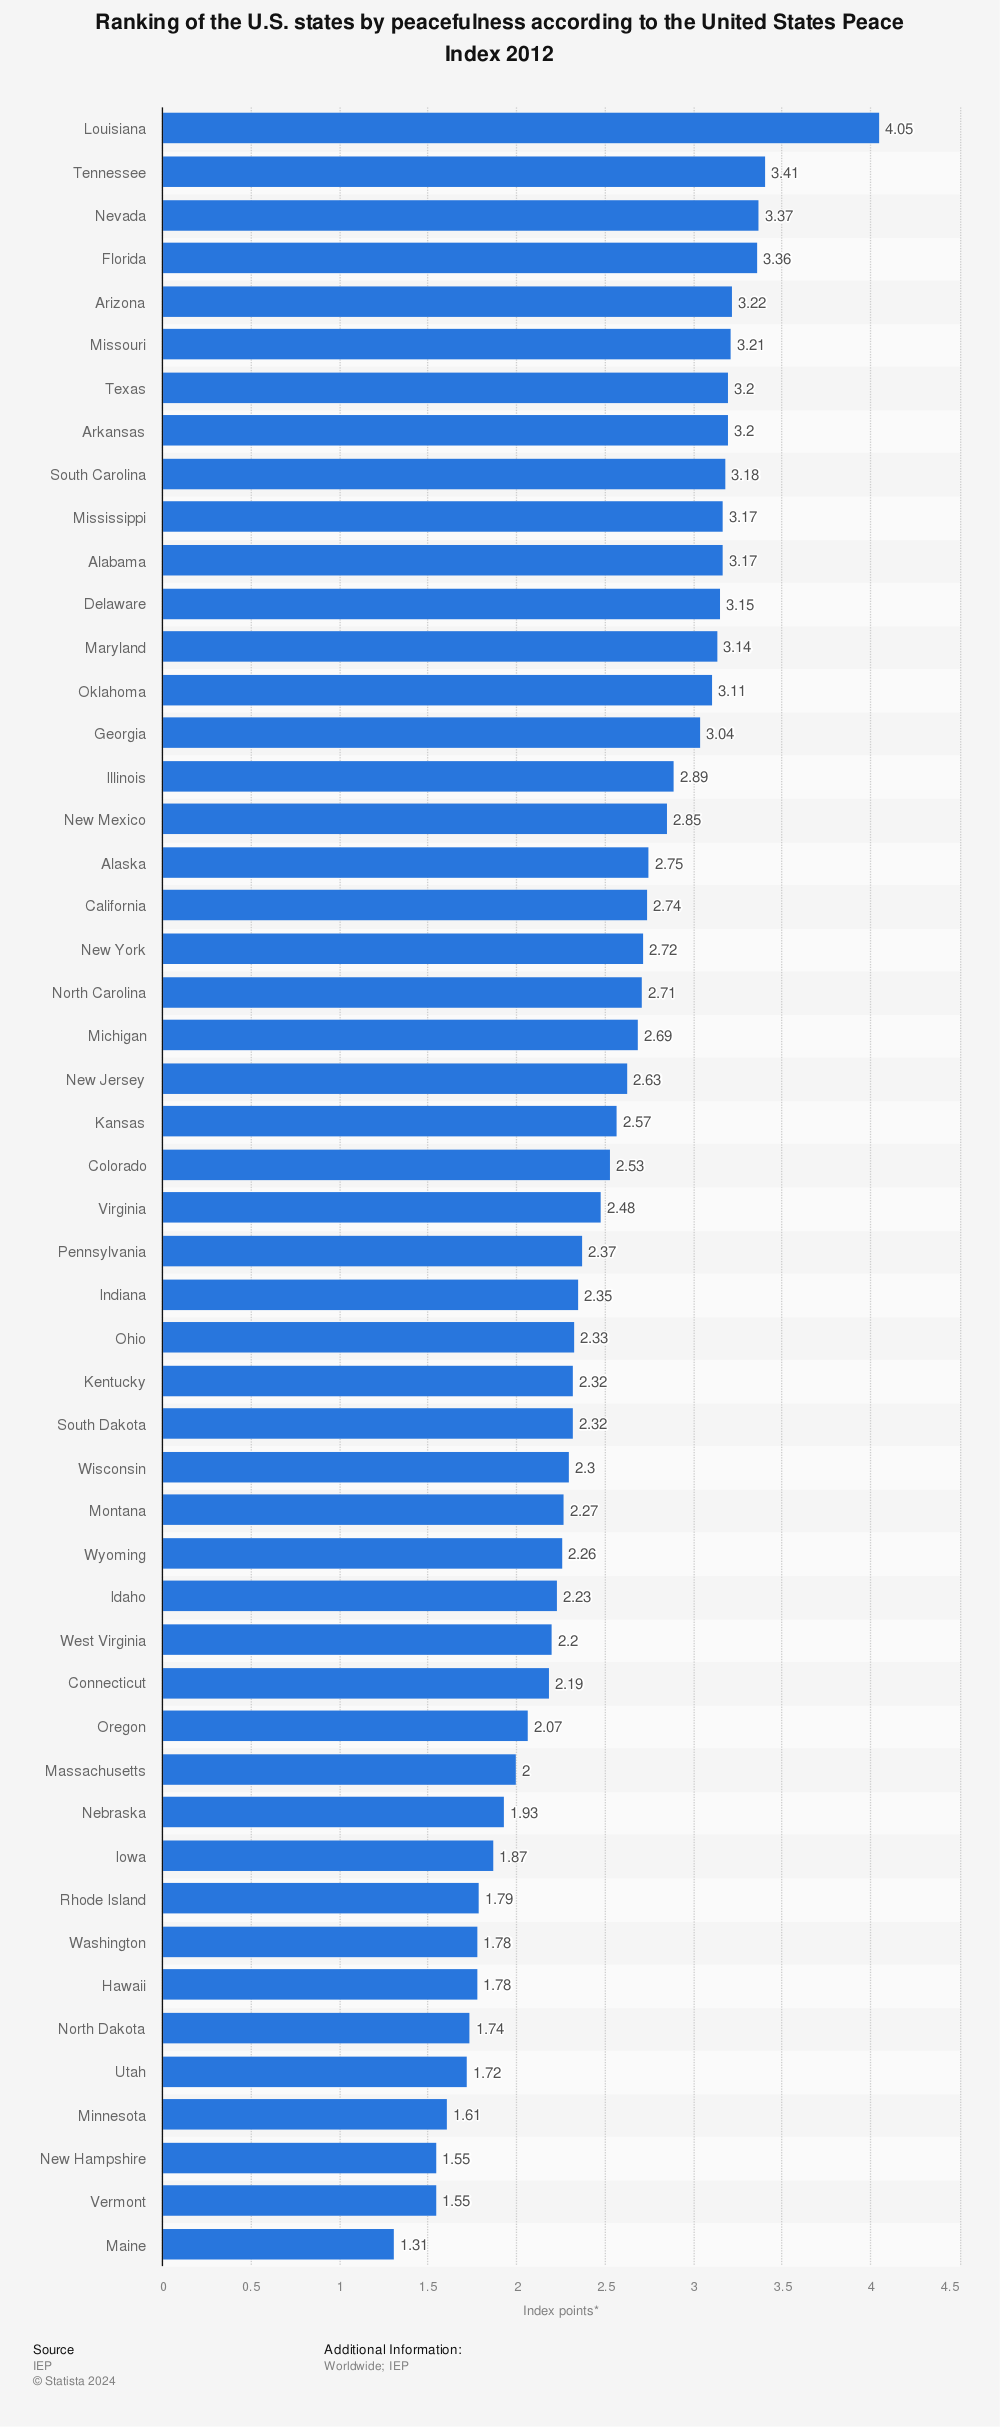 Statistic: Ranking of the U.S. states by peacefulness according to the United States Peace Index 2012 | Statista